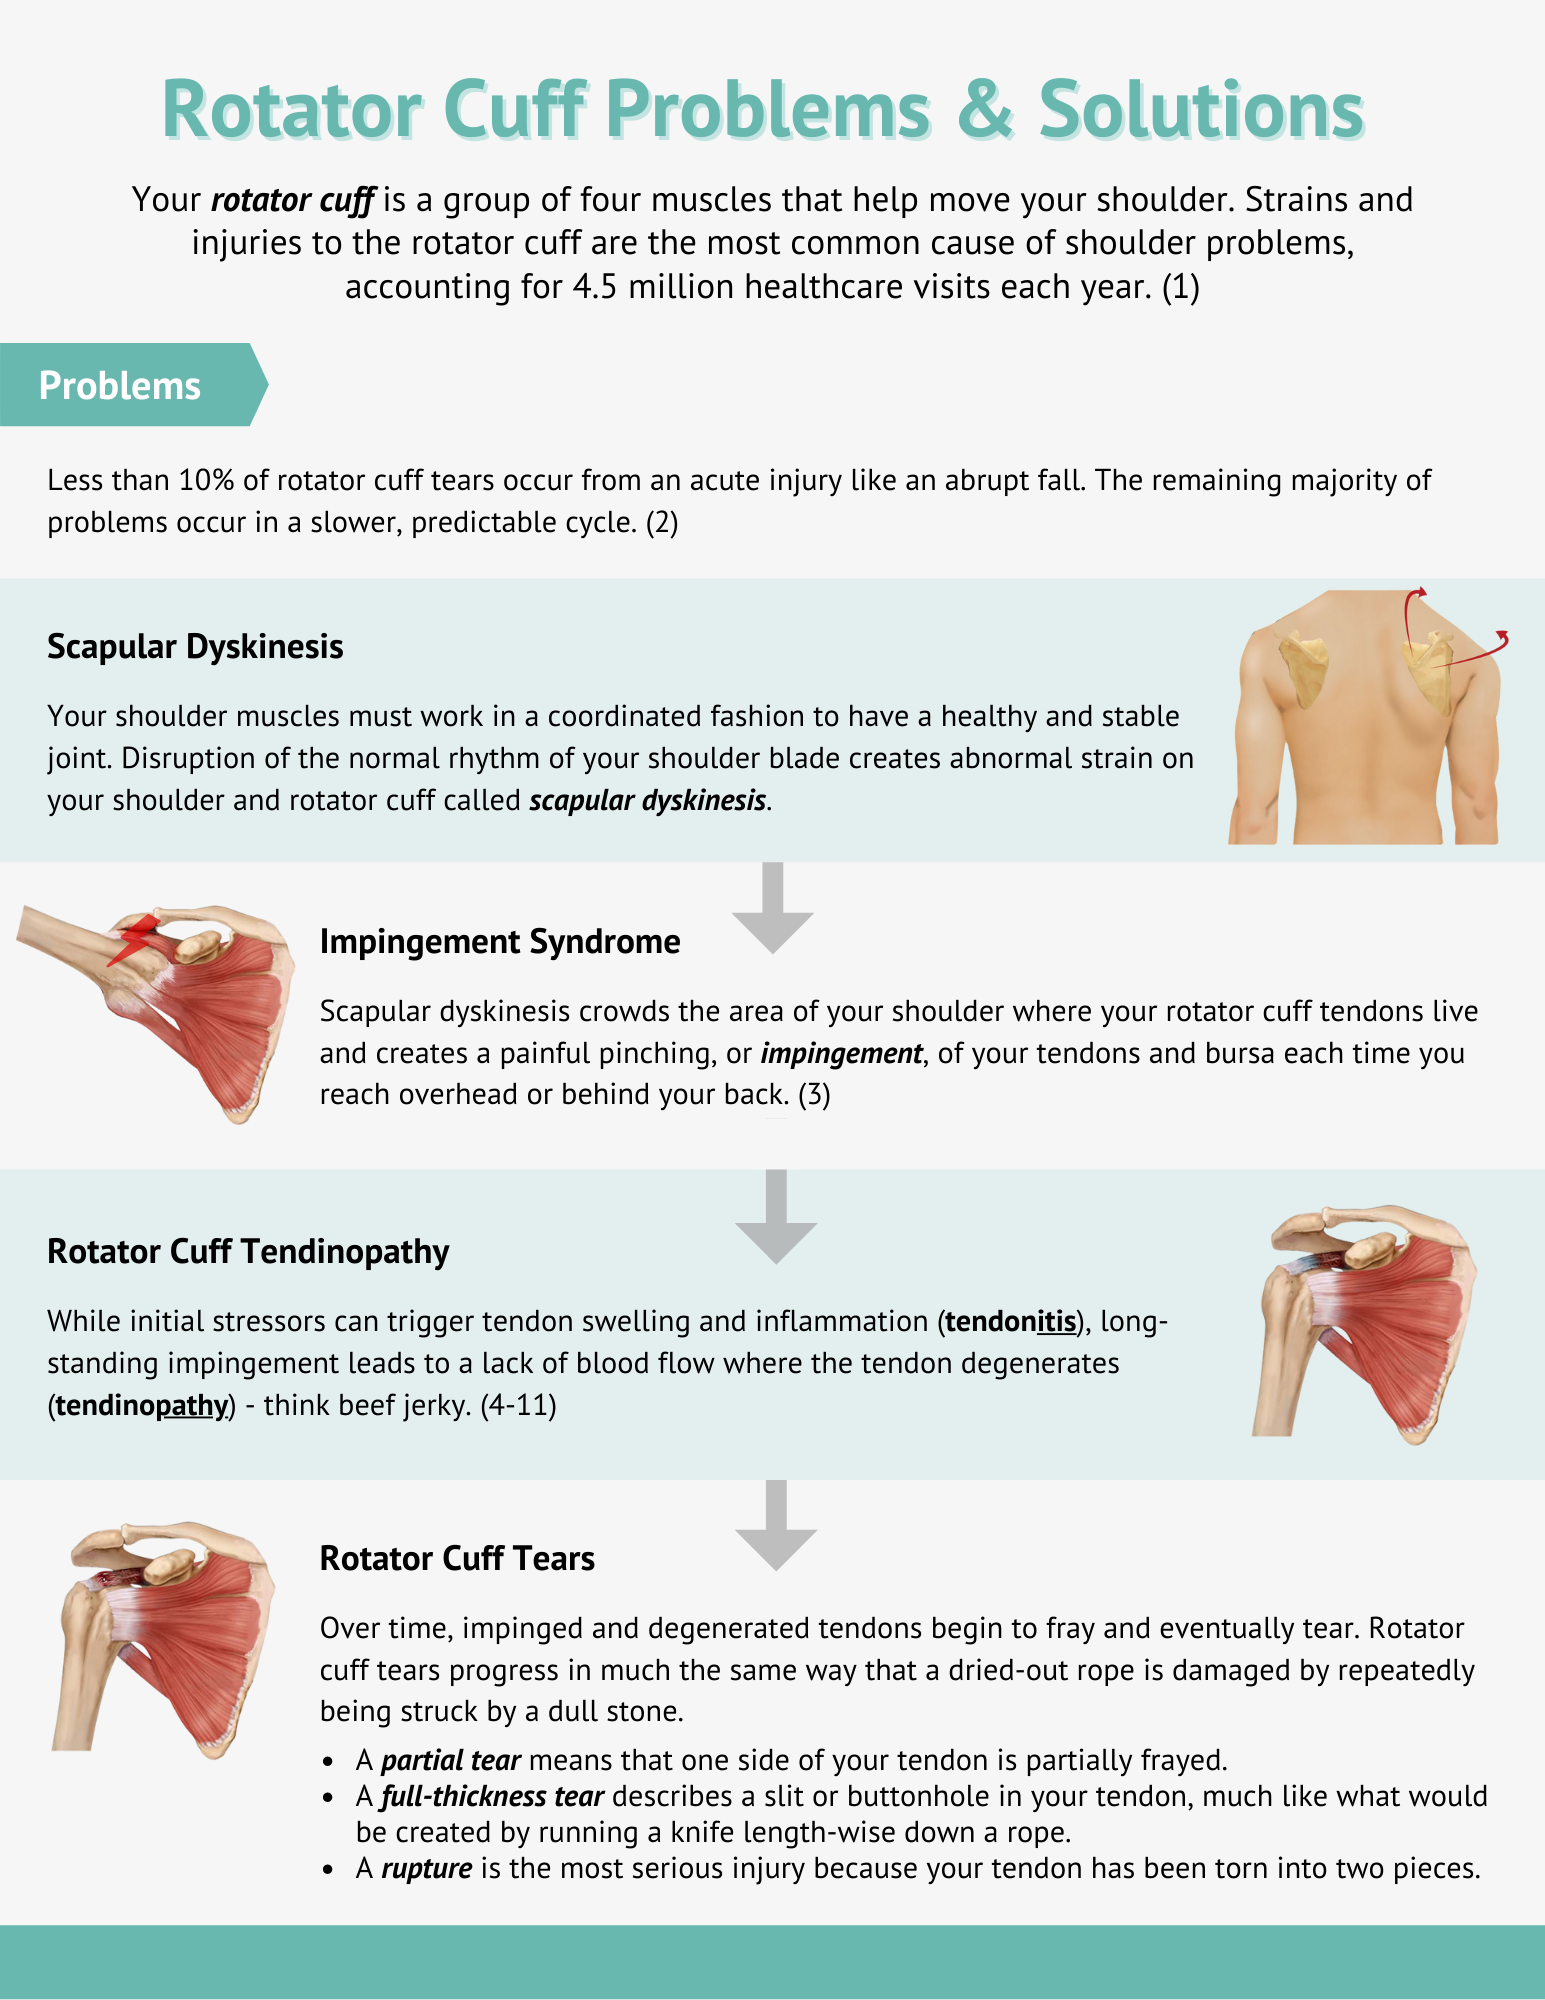 Understanding the Causes of a Rotator Cuff Injury: J. Michael